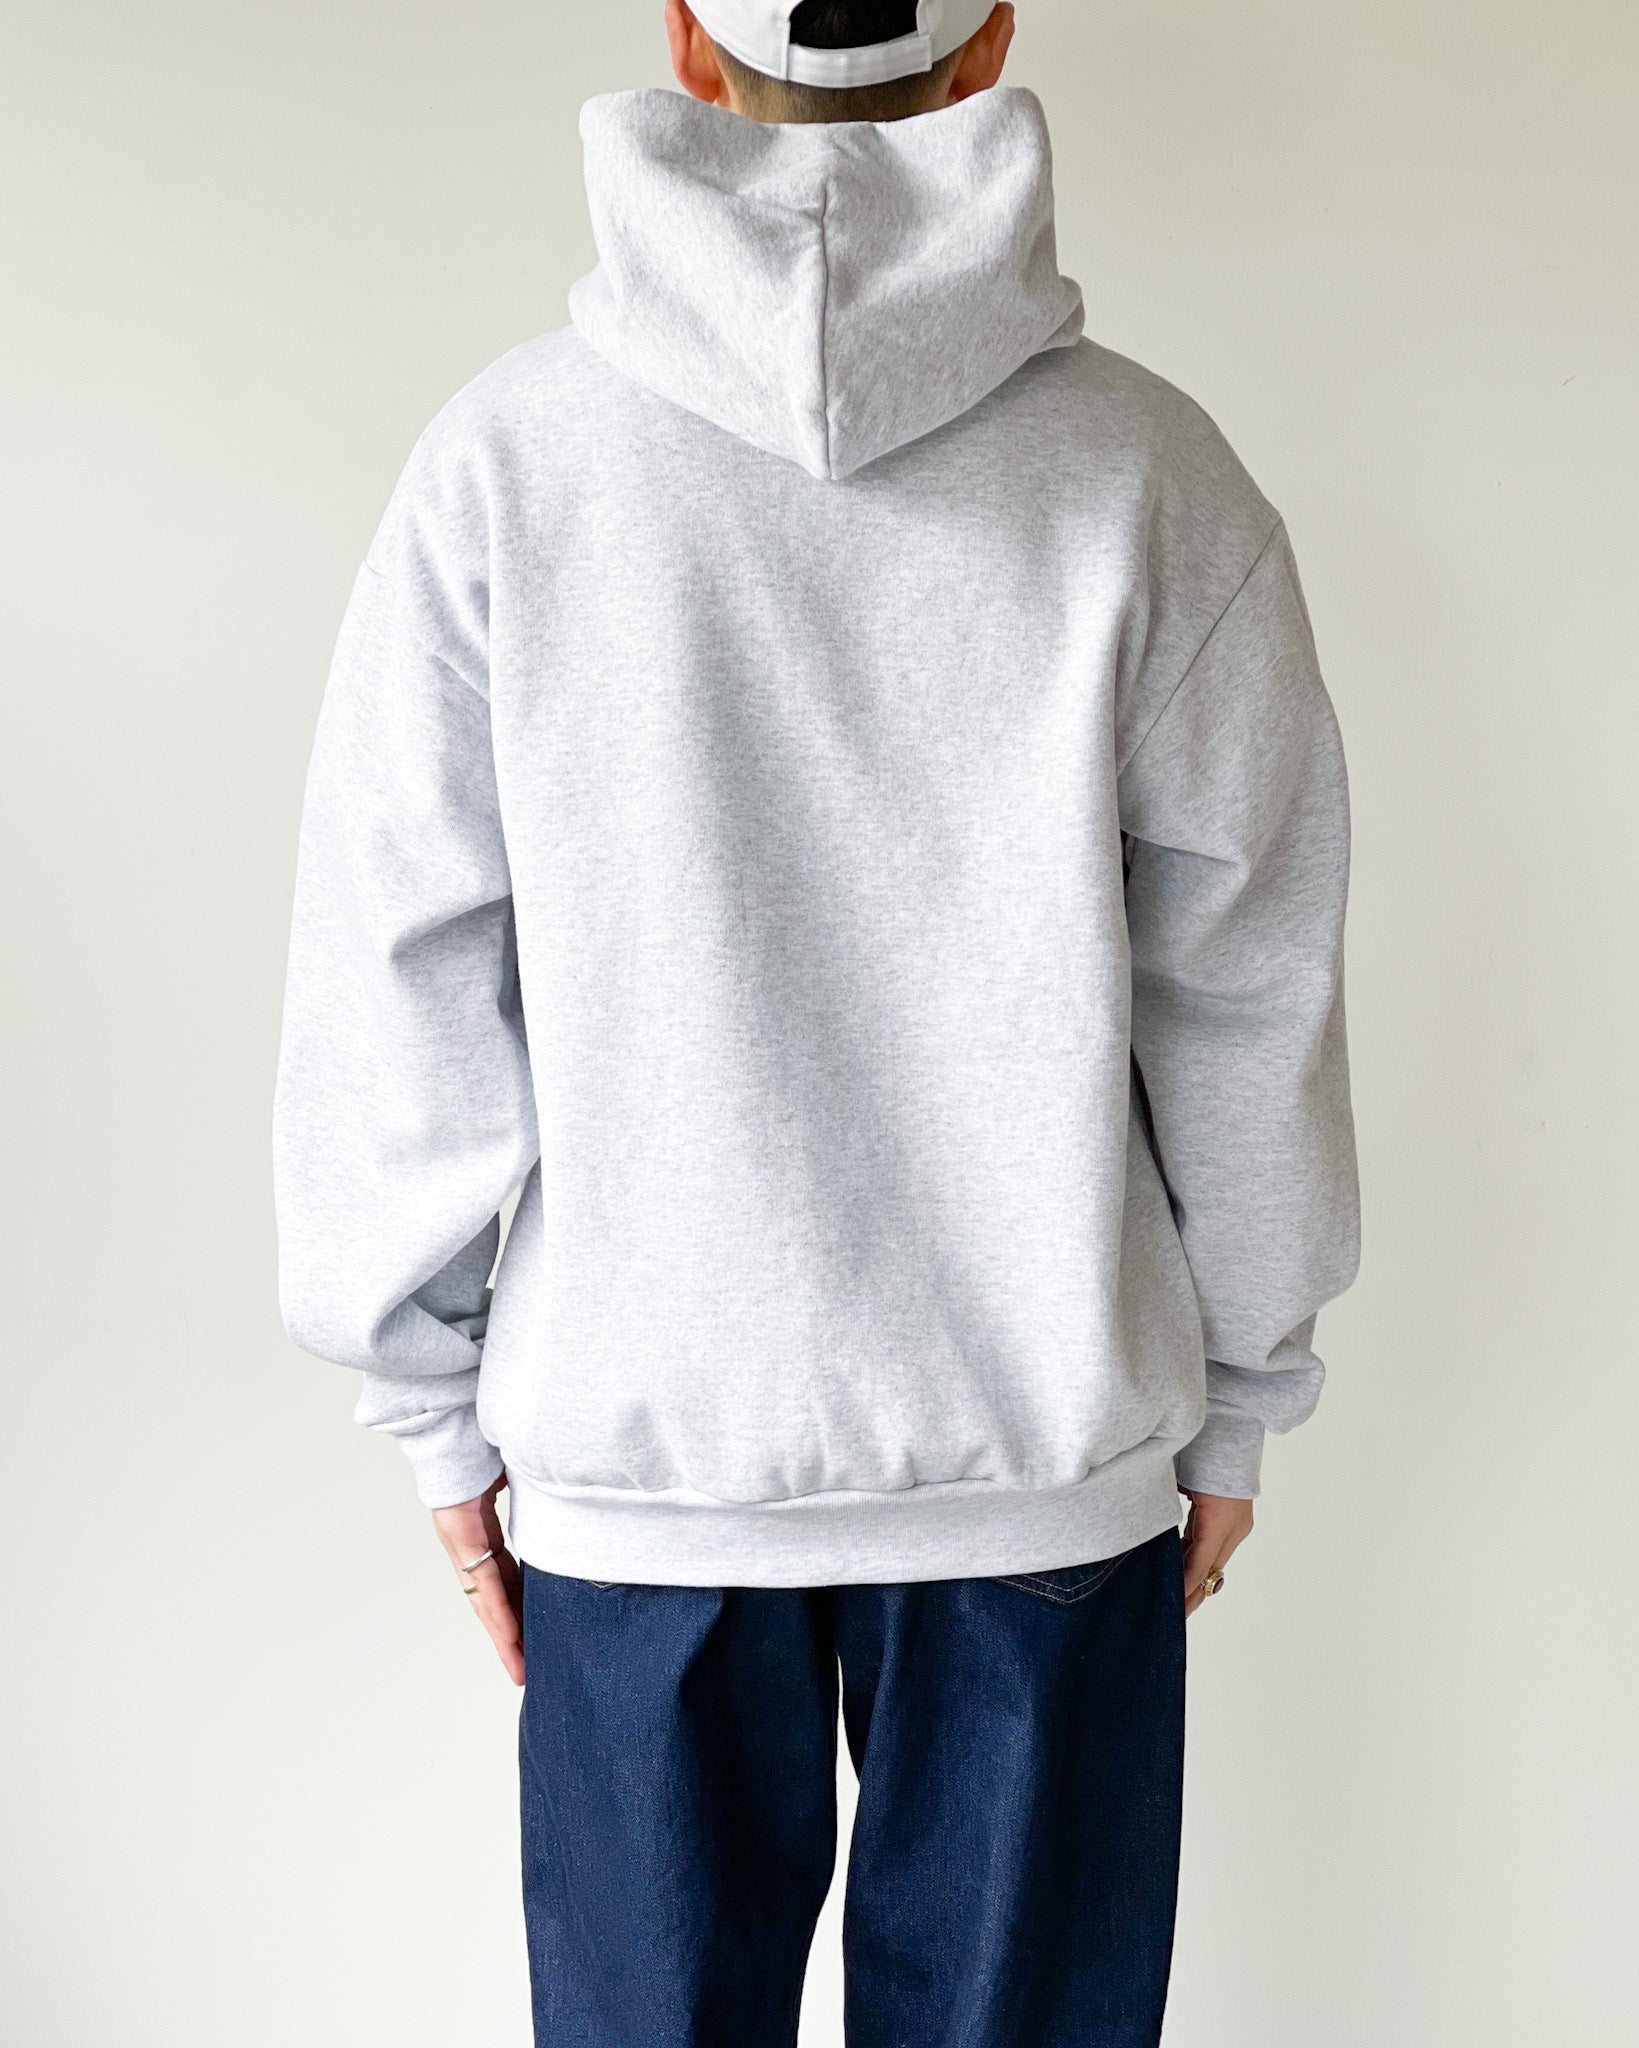 【STACKS】GUESS “THROWUP” HOODIE